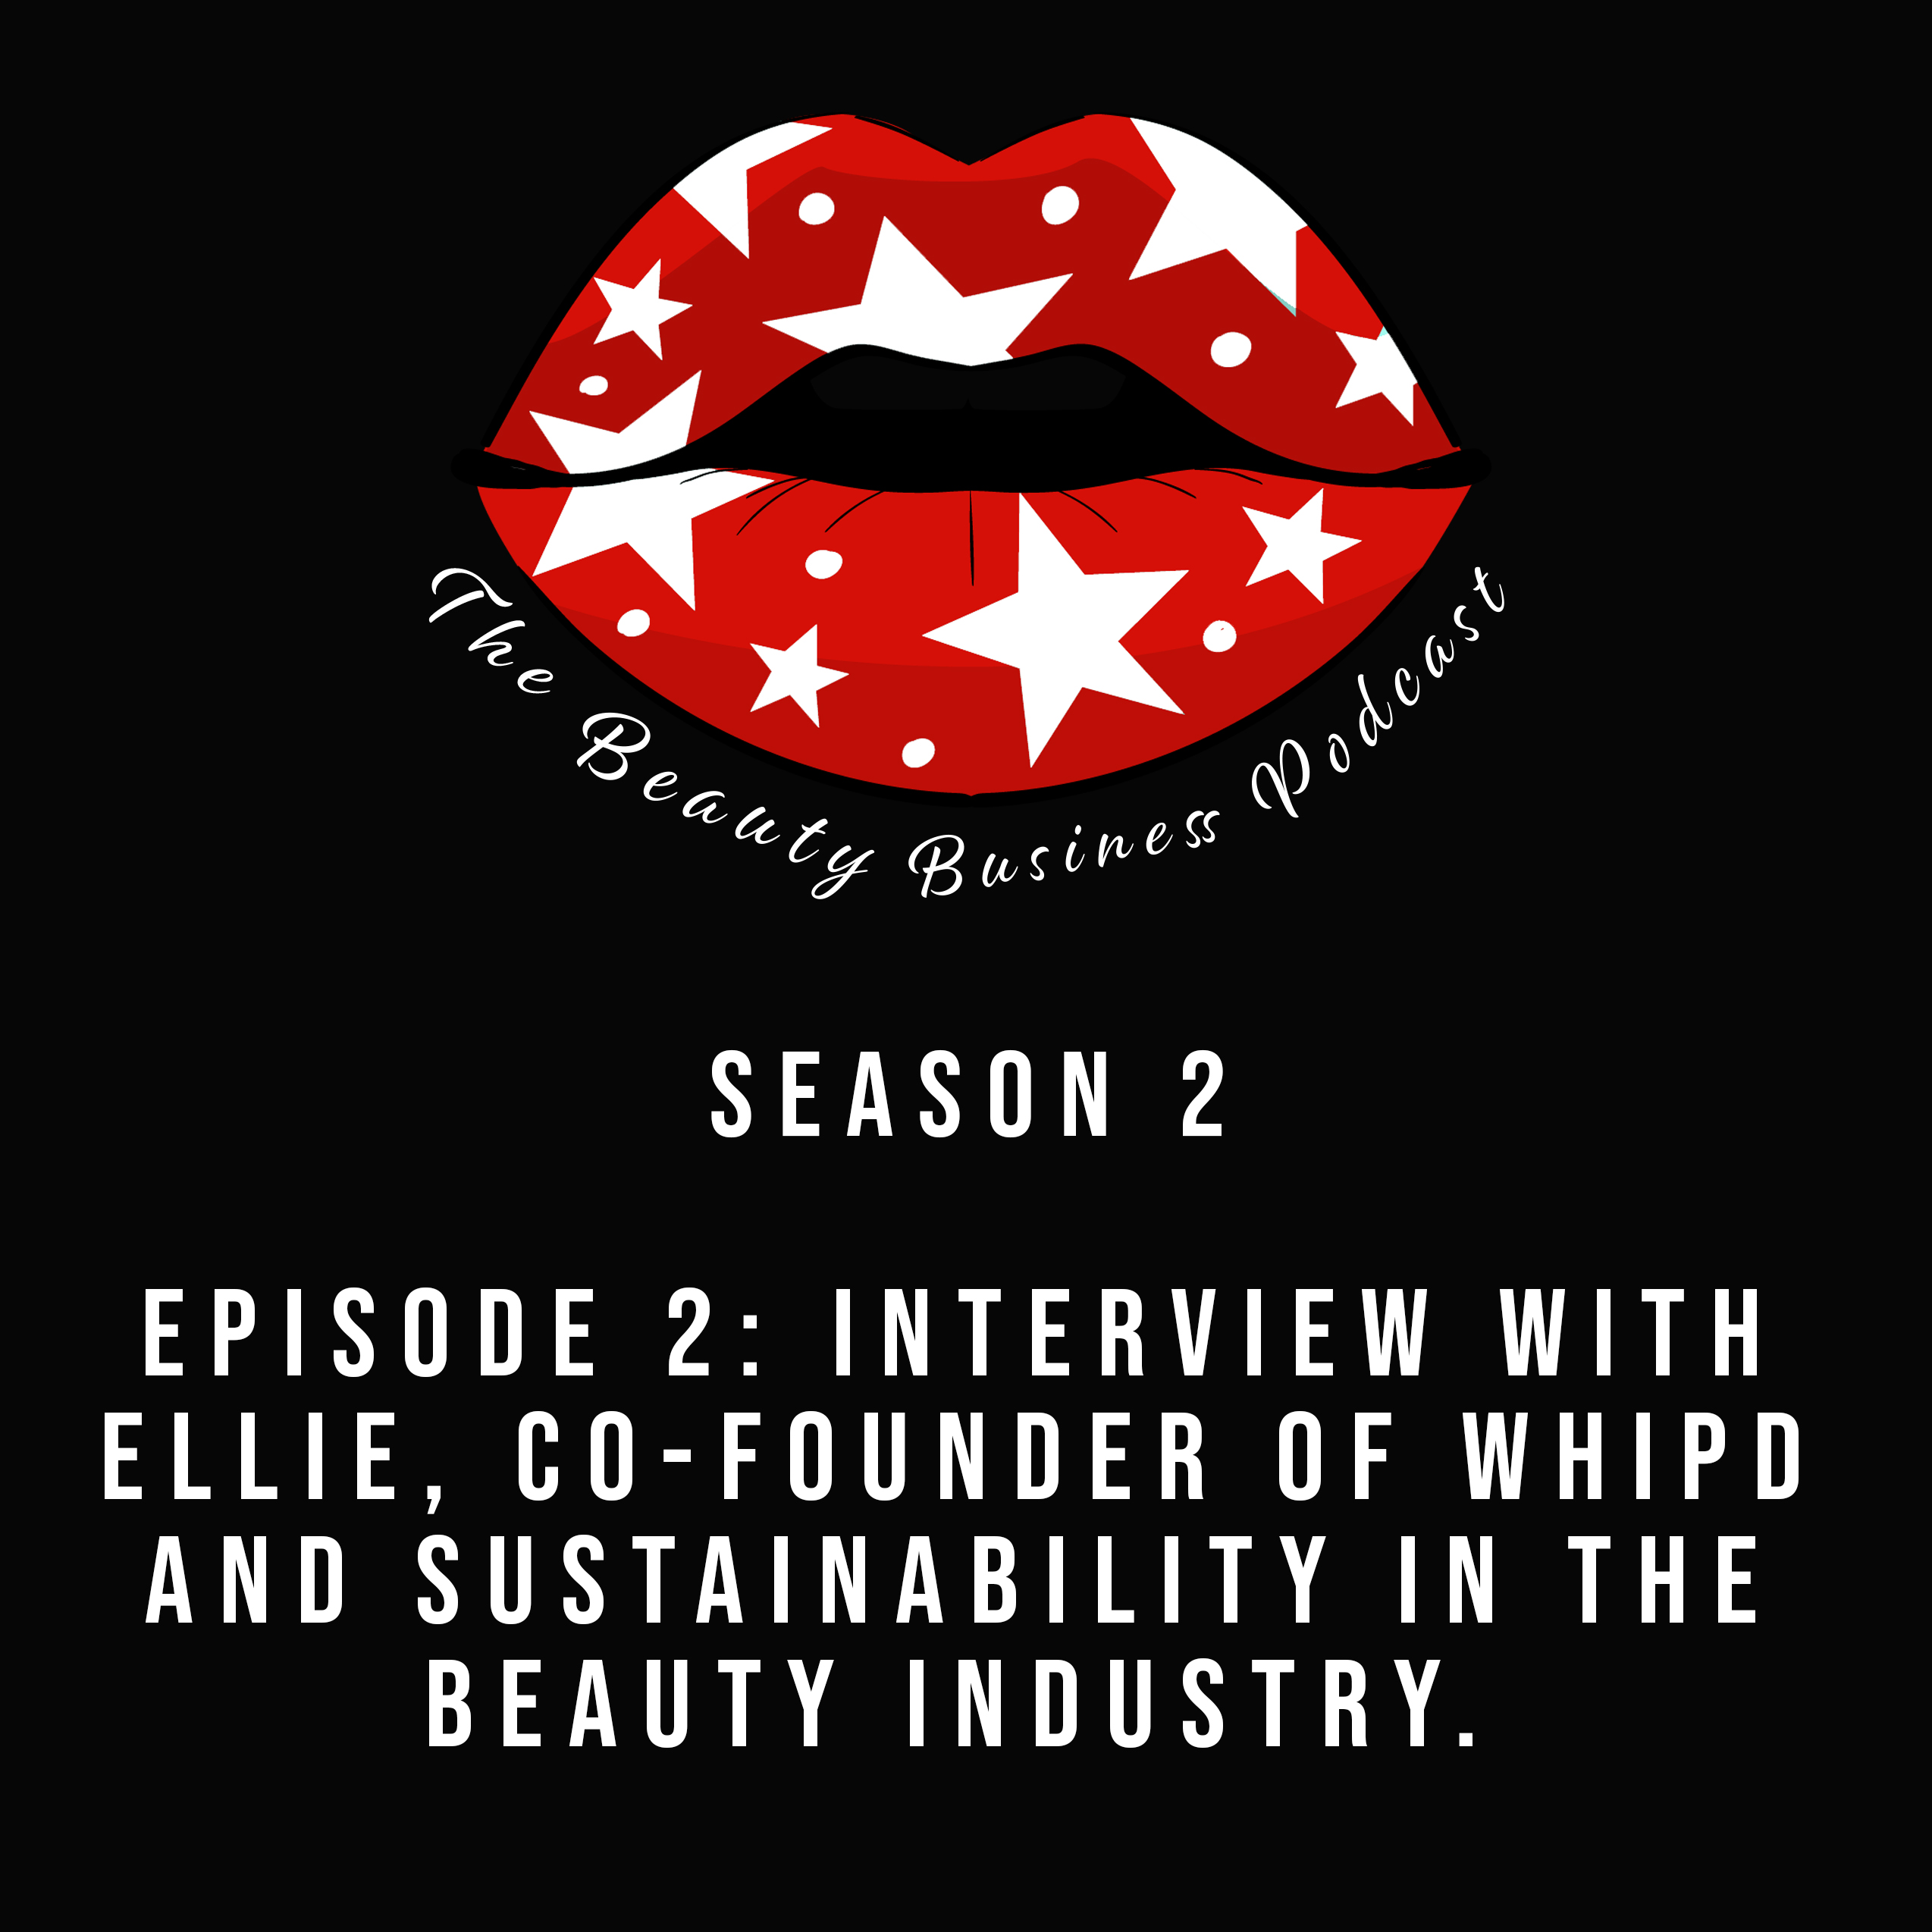 Season 2: Episode 2 - Sustainability in the Beauty Industry. Interview with Whipd Skin's Co-Founder